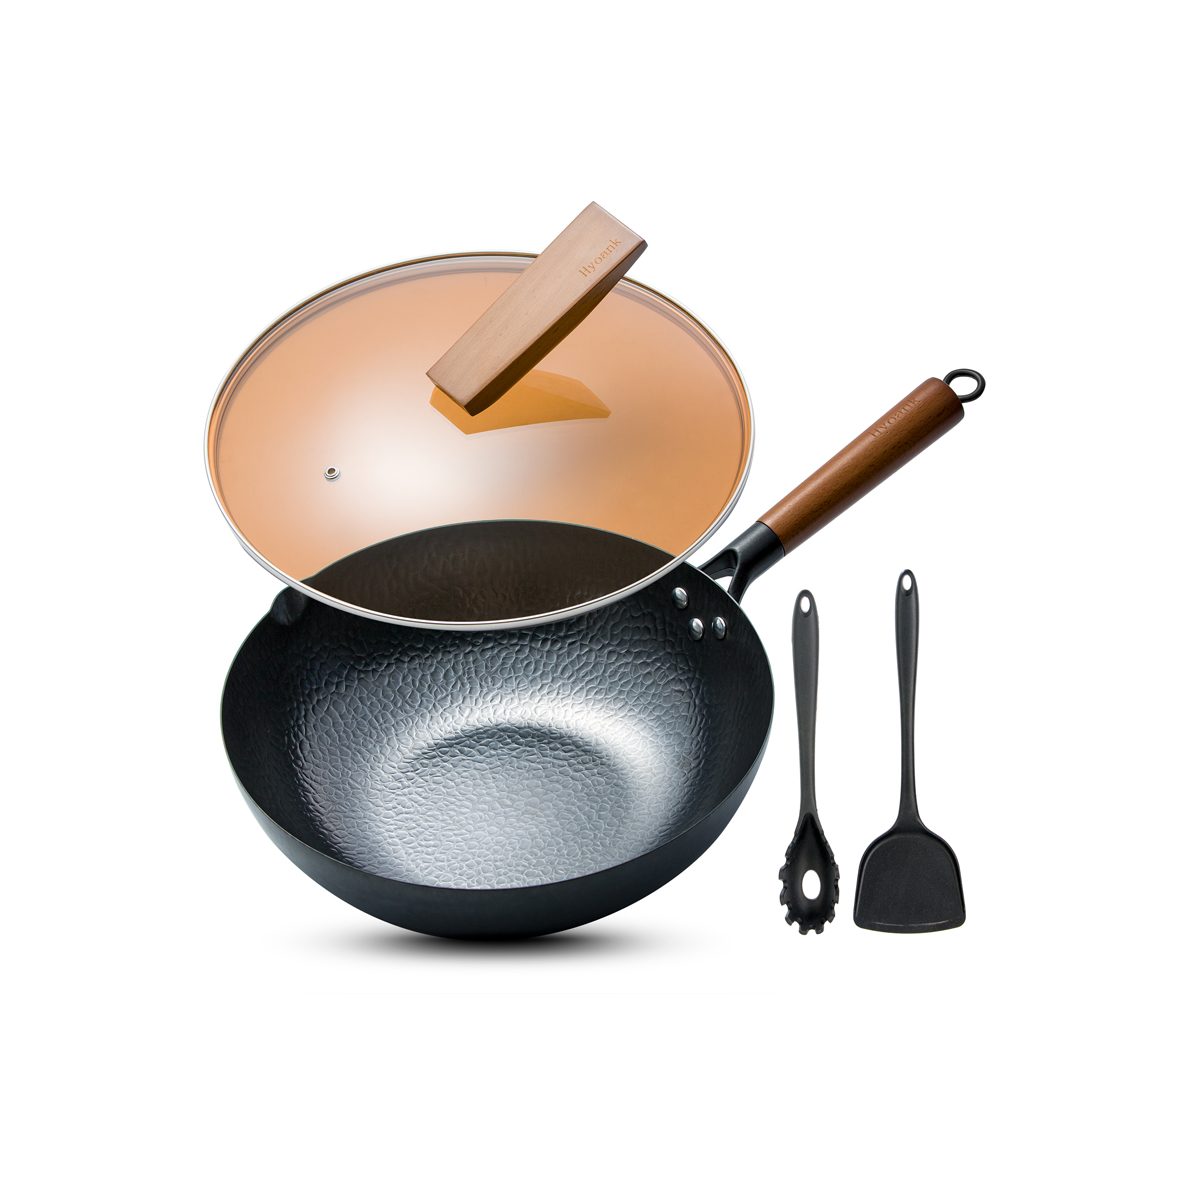 Bielmeier Wok Pan 12.5 Woks and Stir Fry Pans with lid Flat Bottom Wok Carbon Steel Wok with Cookware Accessories Wok with Lid Suits for all Stoves 